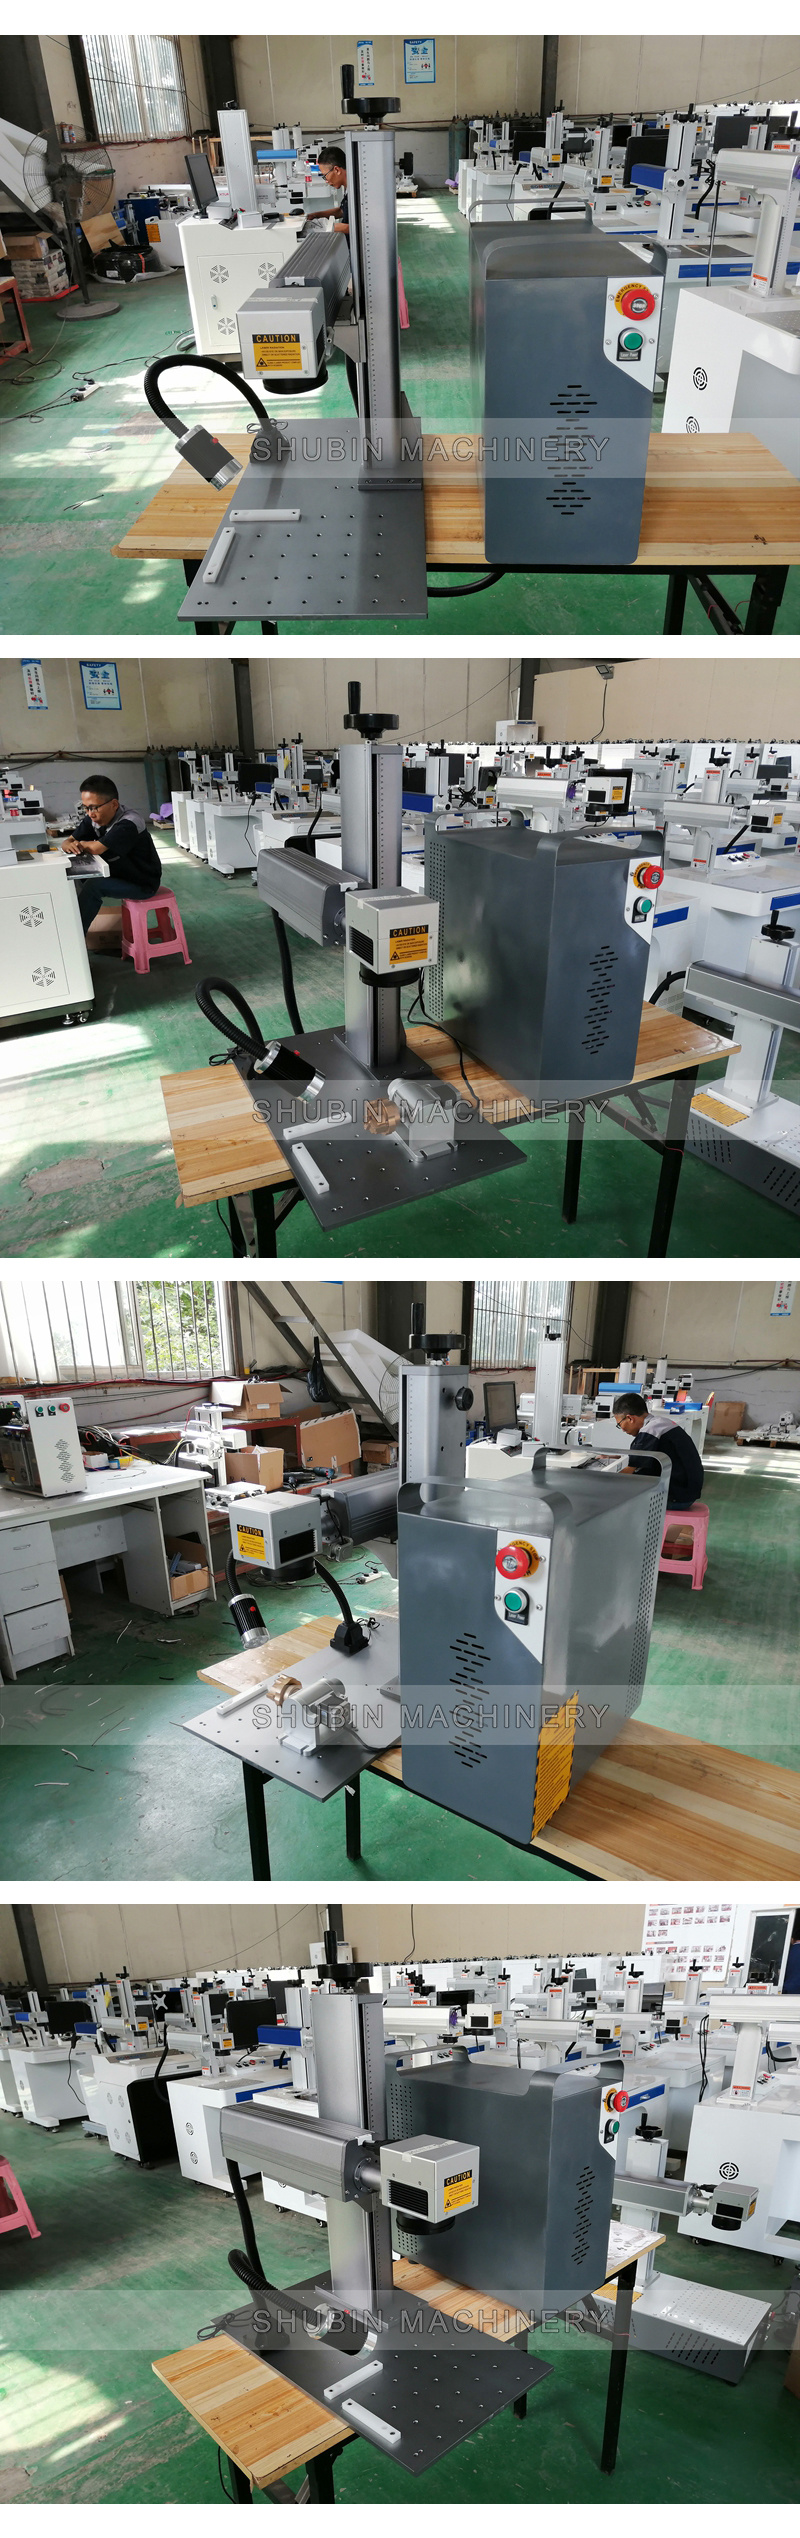 Metal Engraver Stainless Steel Plastic Fiber Laser Marking Machine 30W 50W with Rotary Axis